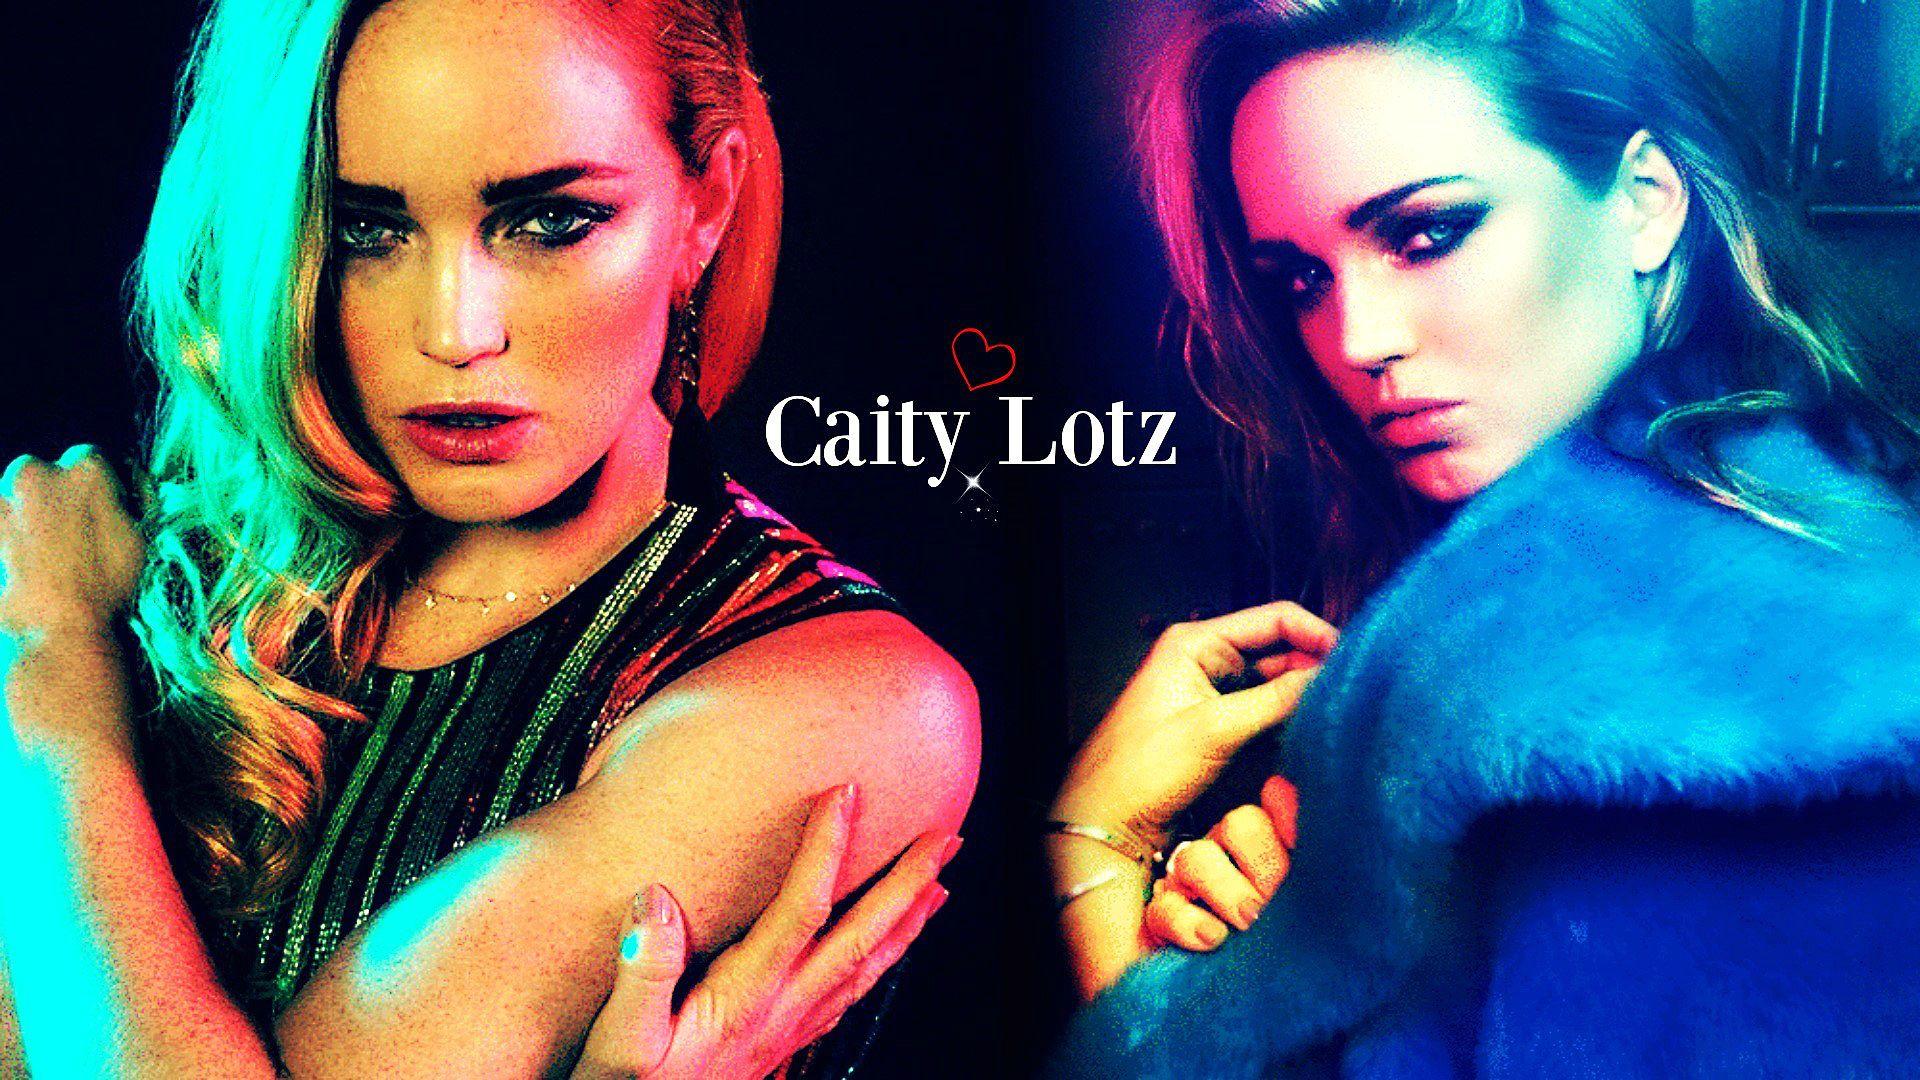 Caity Lotz image Caity Lotz Wallpaper HD wallpaper and background